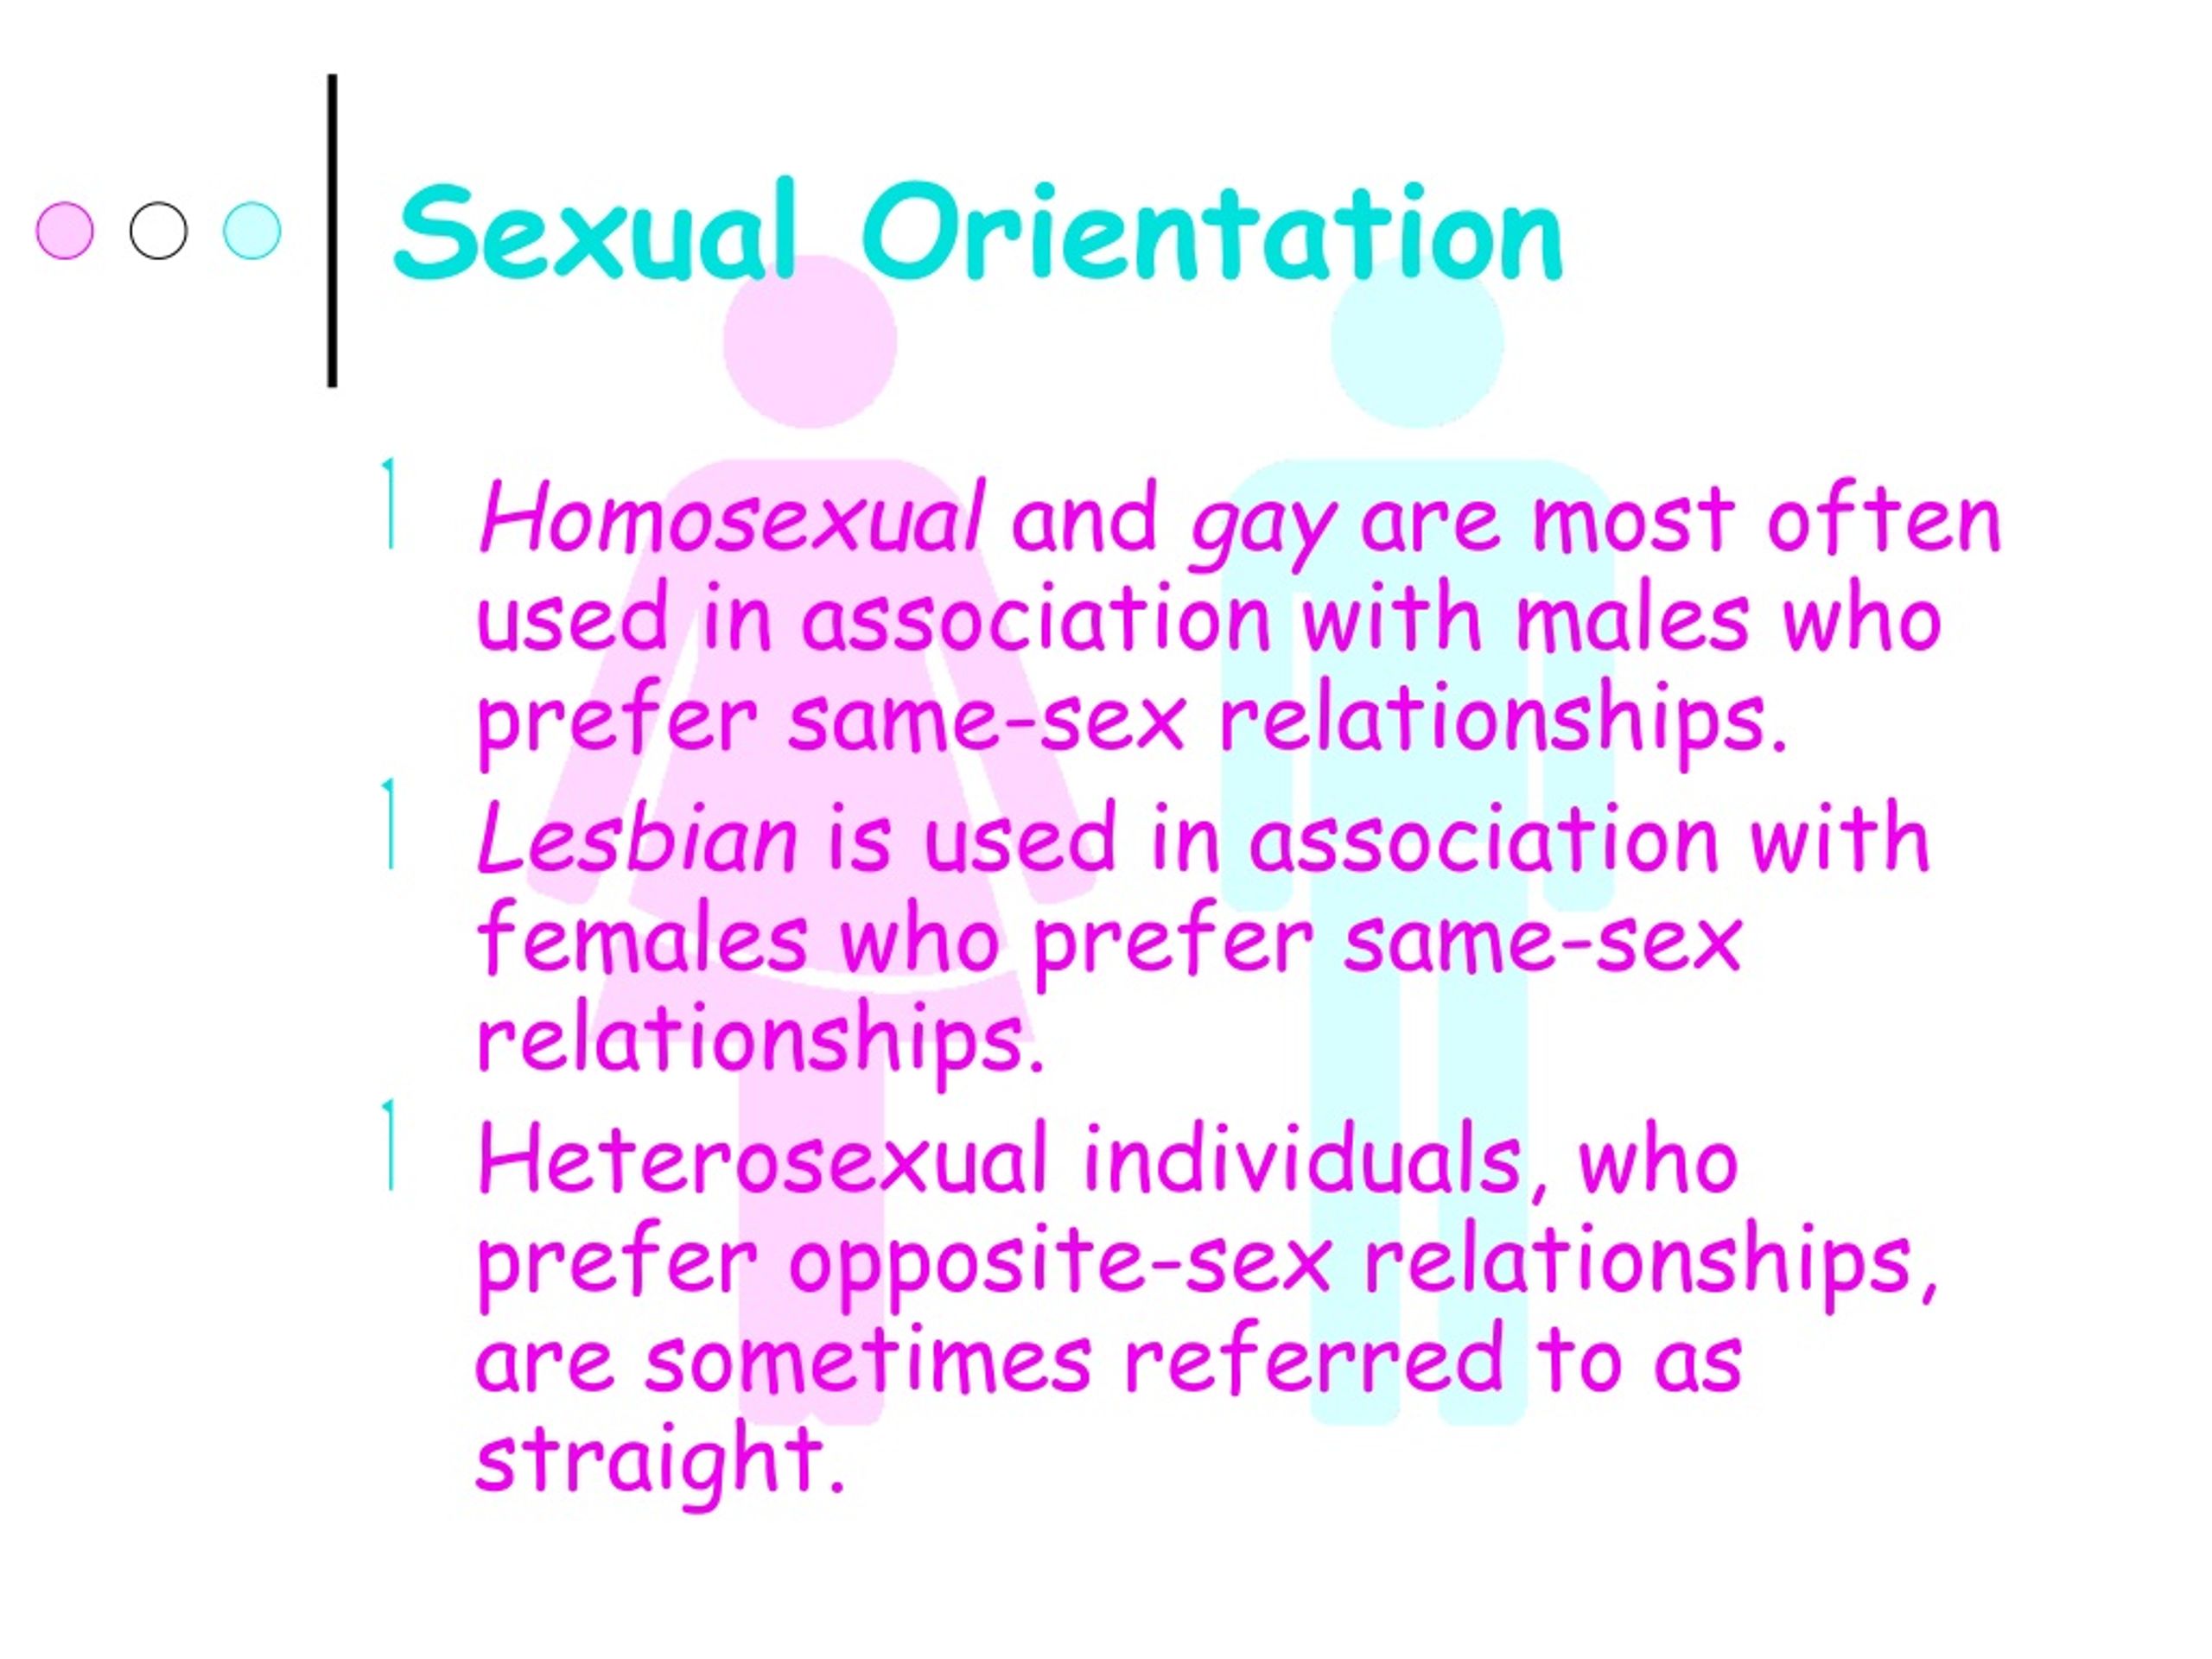 Ppt Sex And Gender Powerpoint Presentation Free Download Id9152679